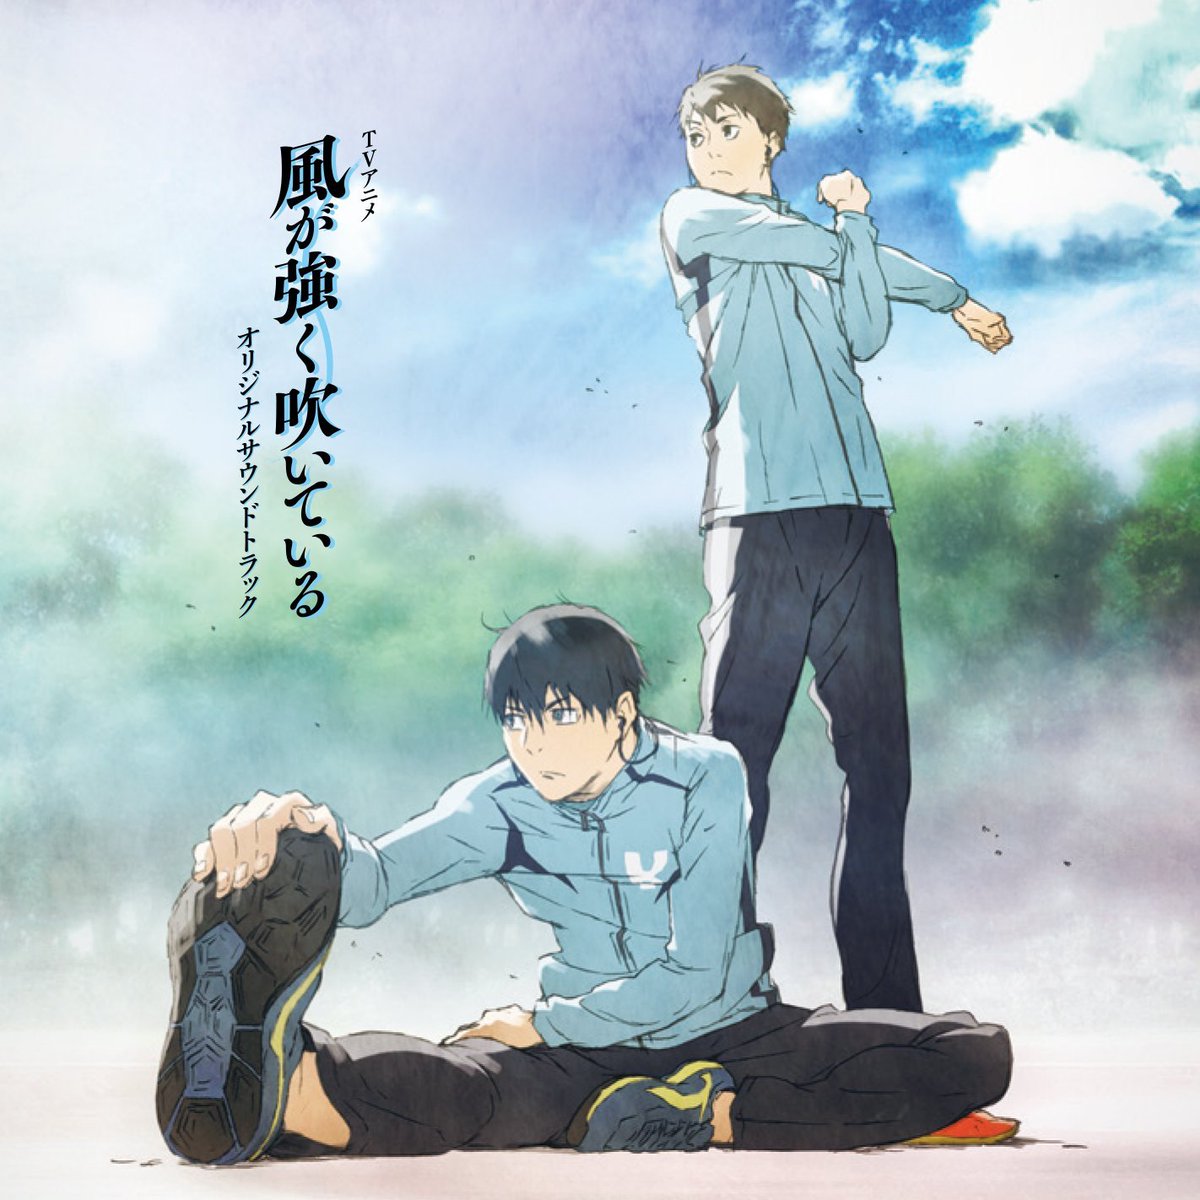 Run with the Wind

Love the soundtracks, especially the first ED. Watch it if you haven't. Life-changing sport anime.